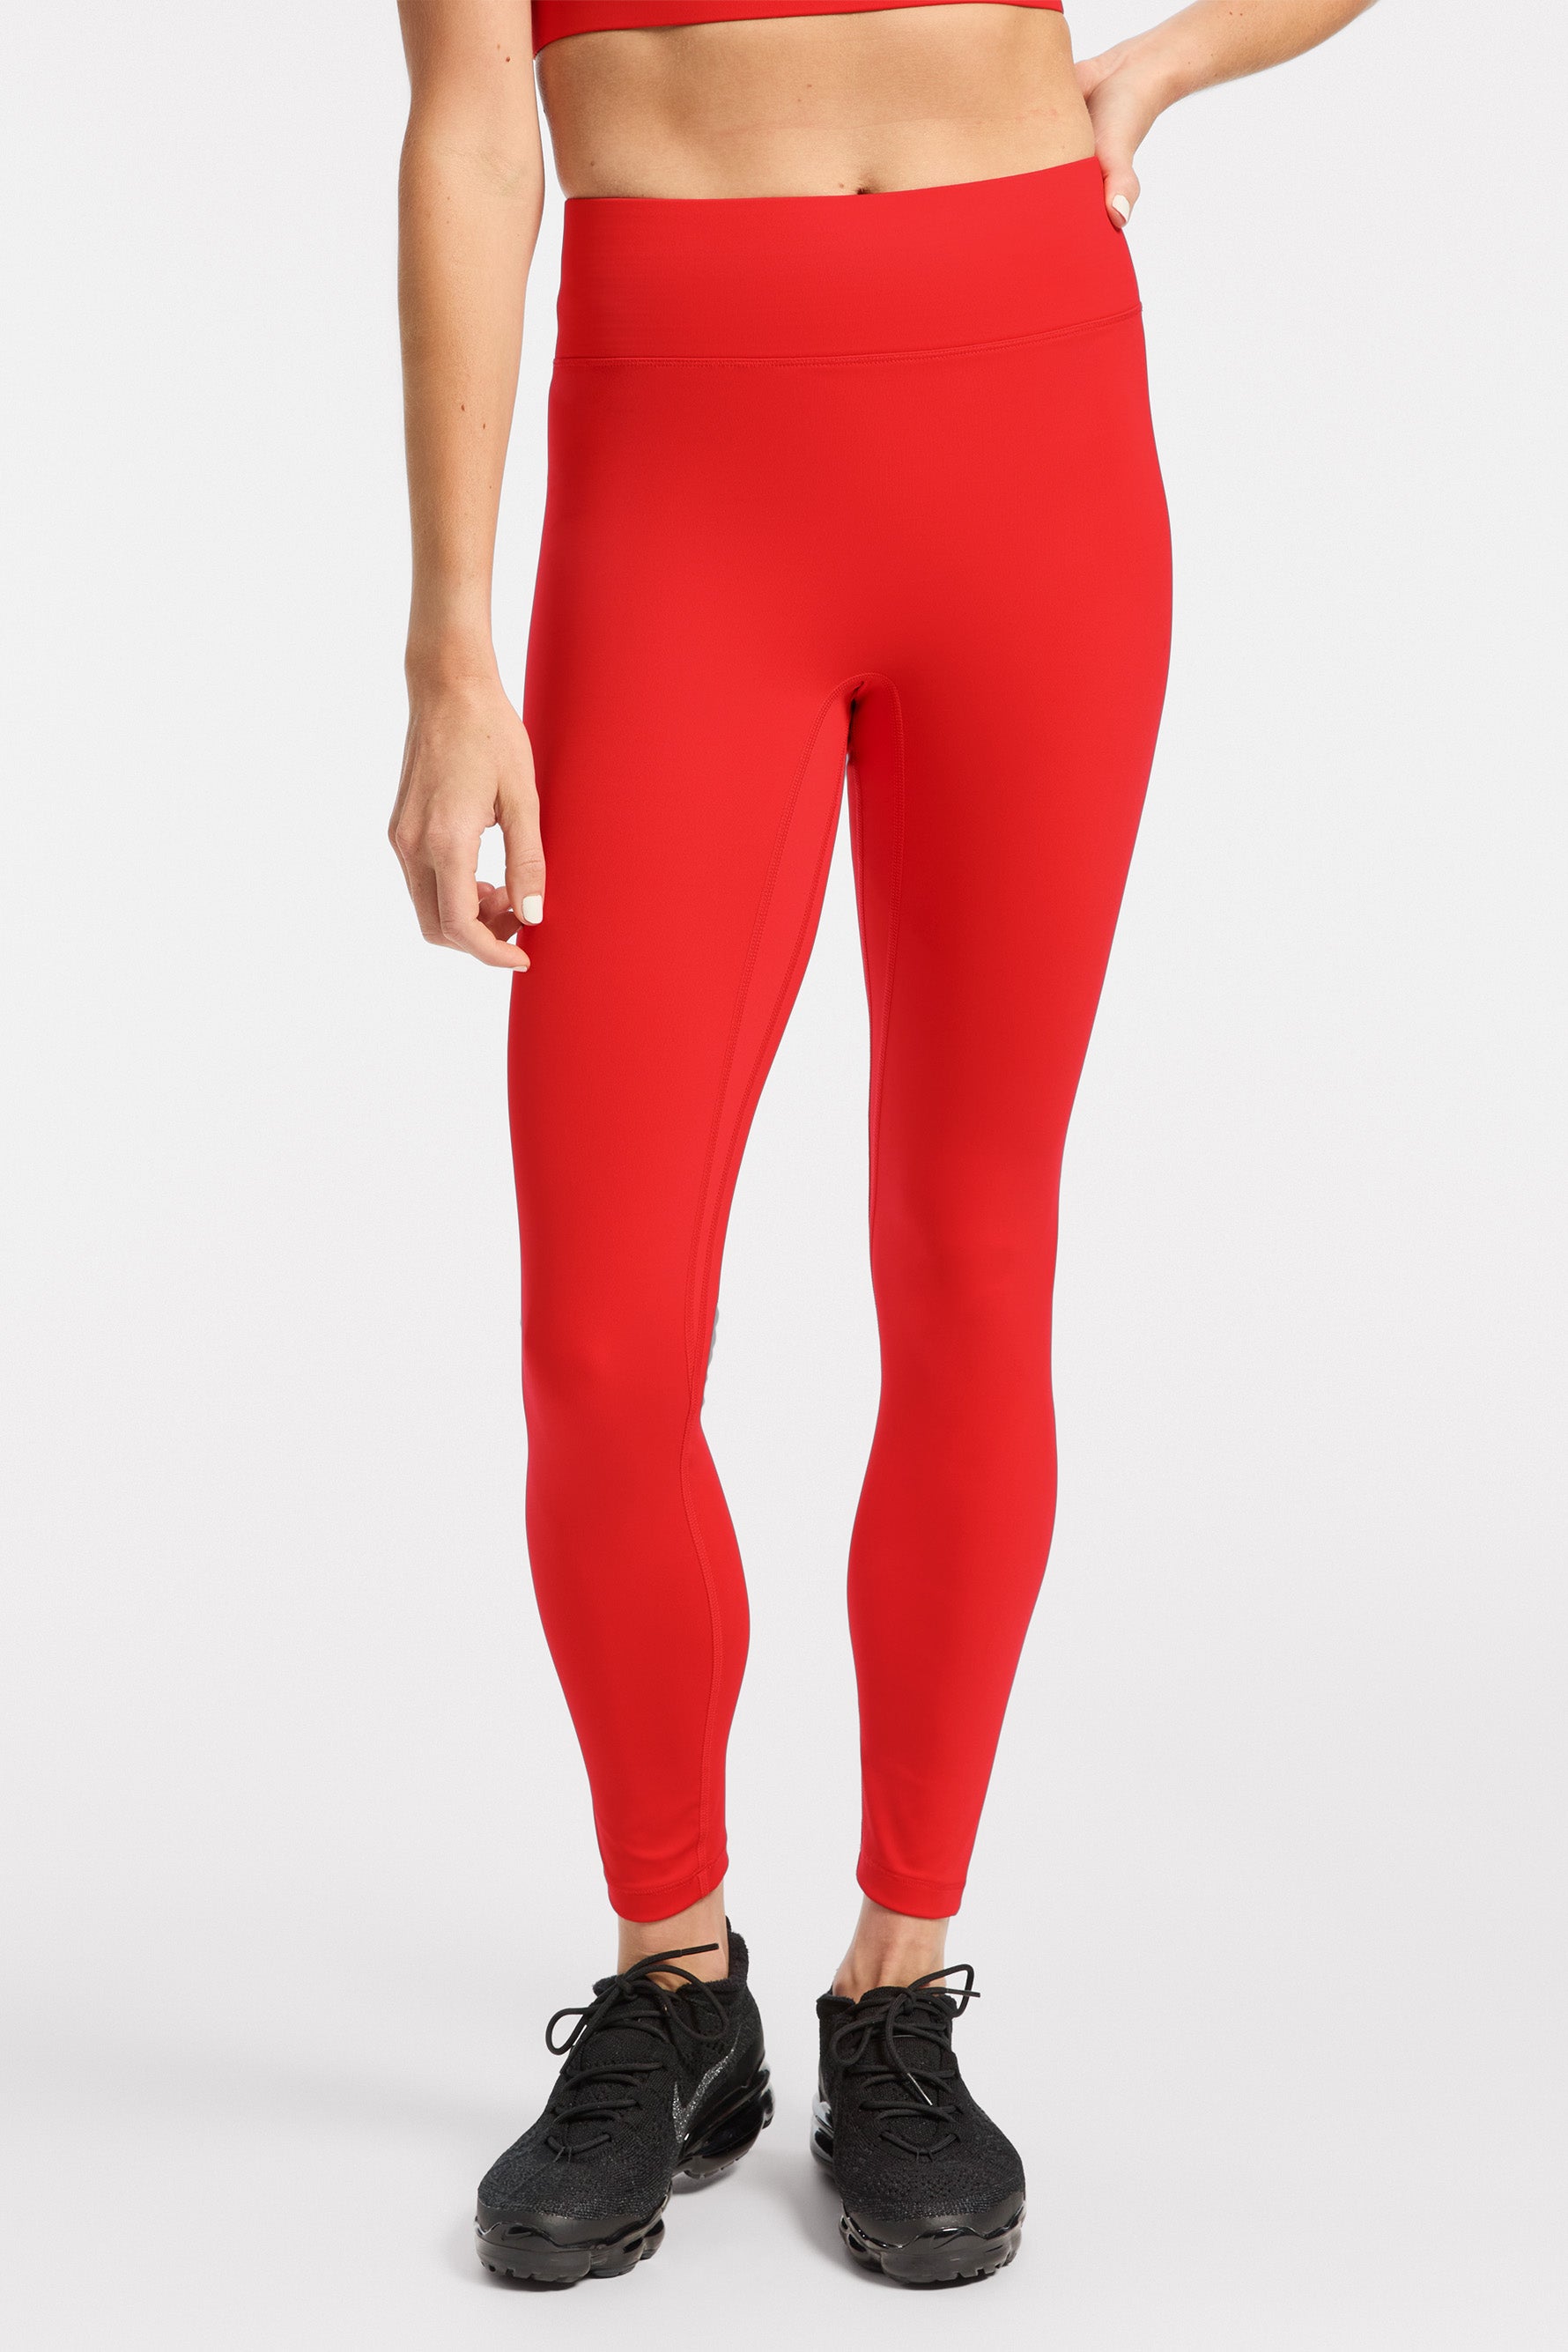 Bandier Center Stage Legging $120 5 colors available